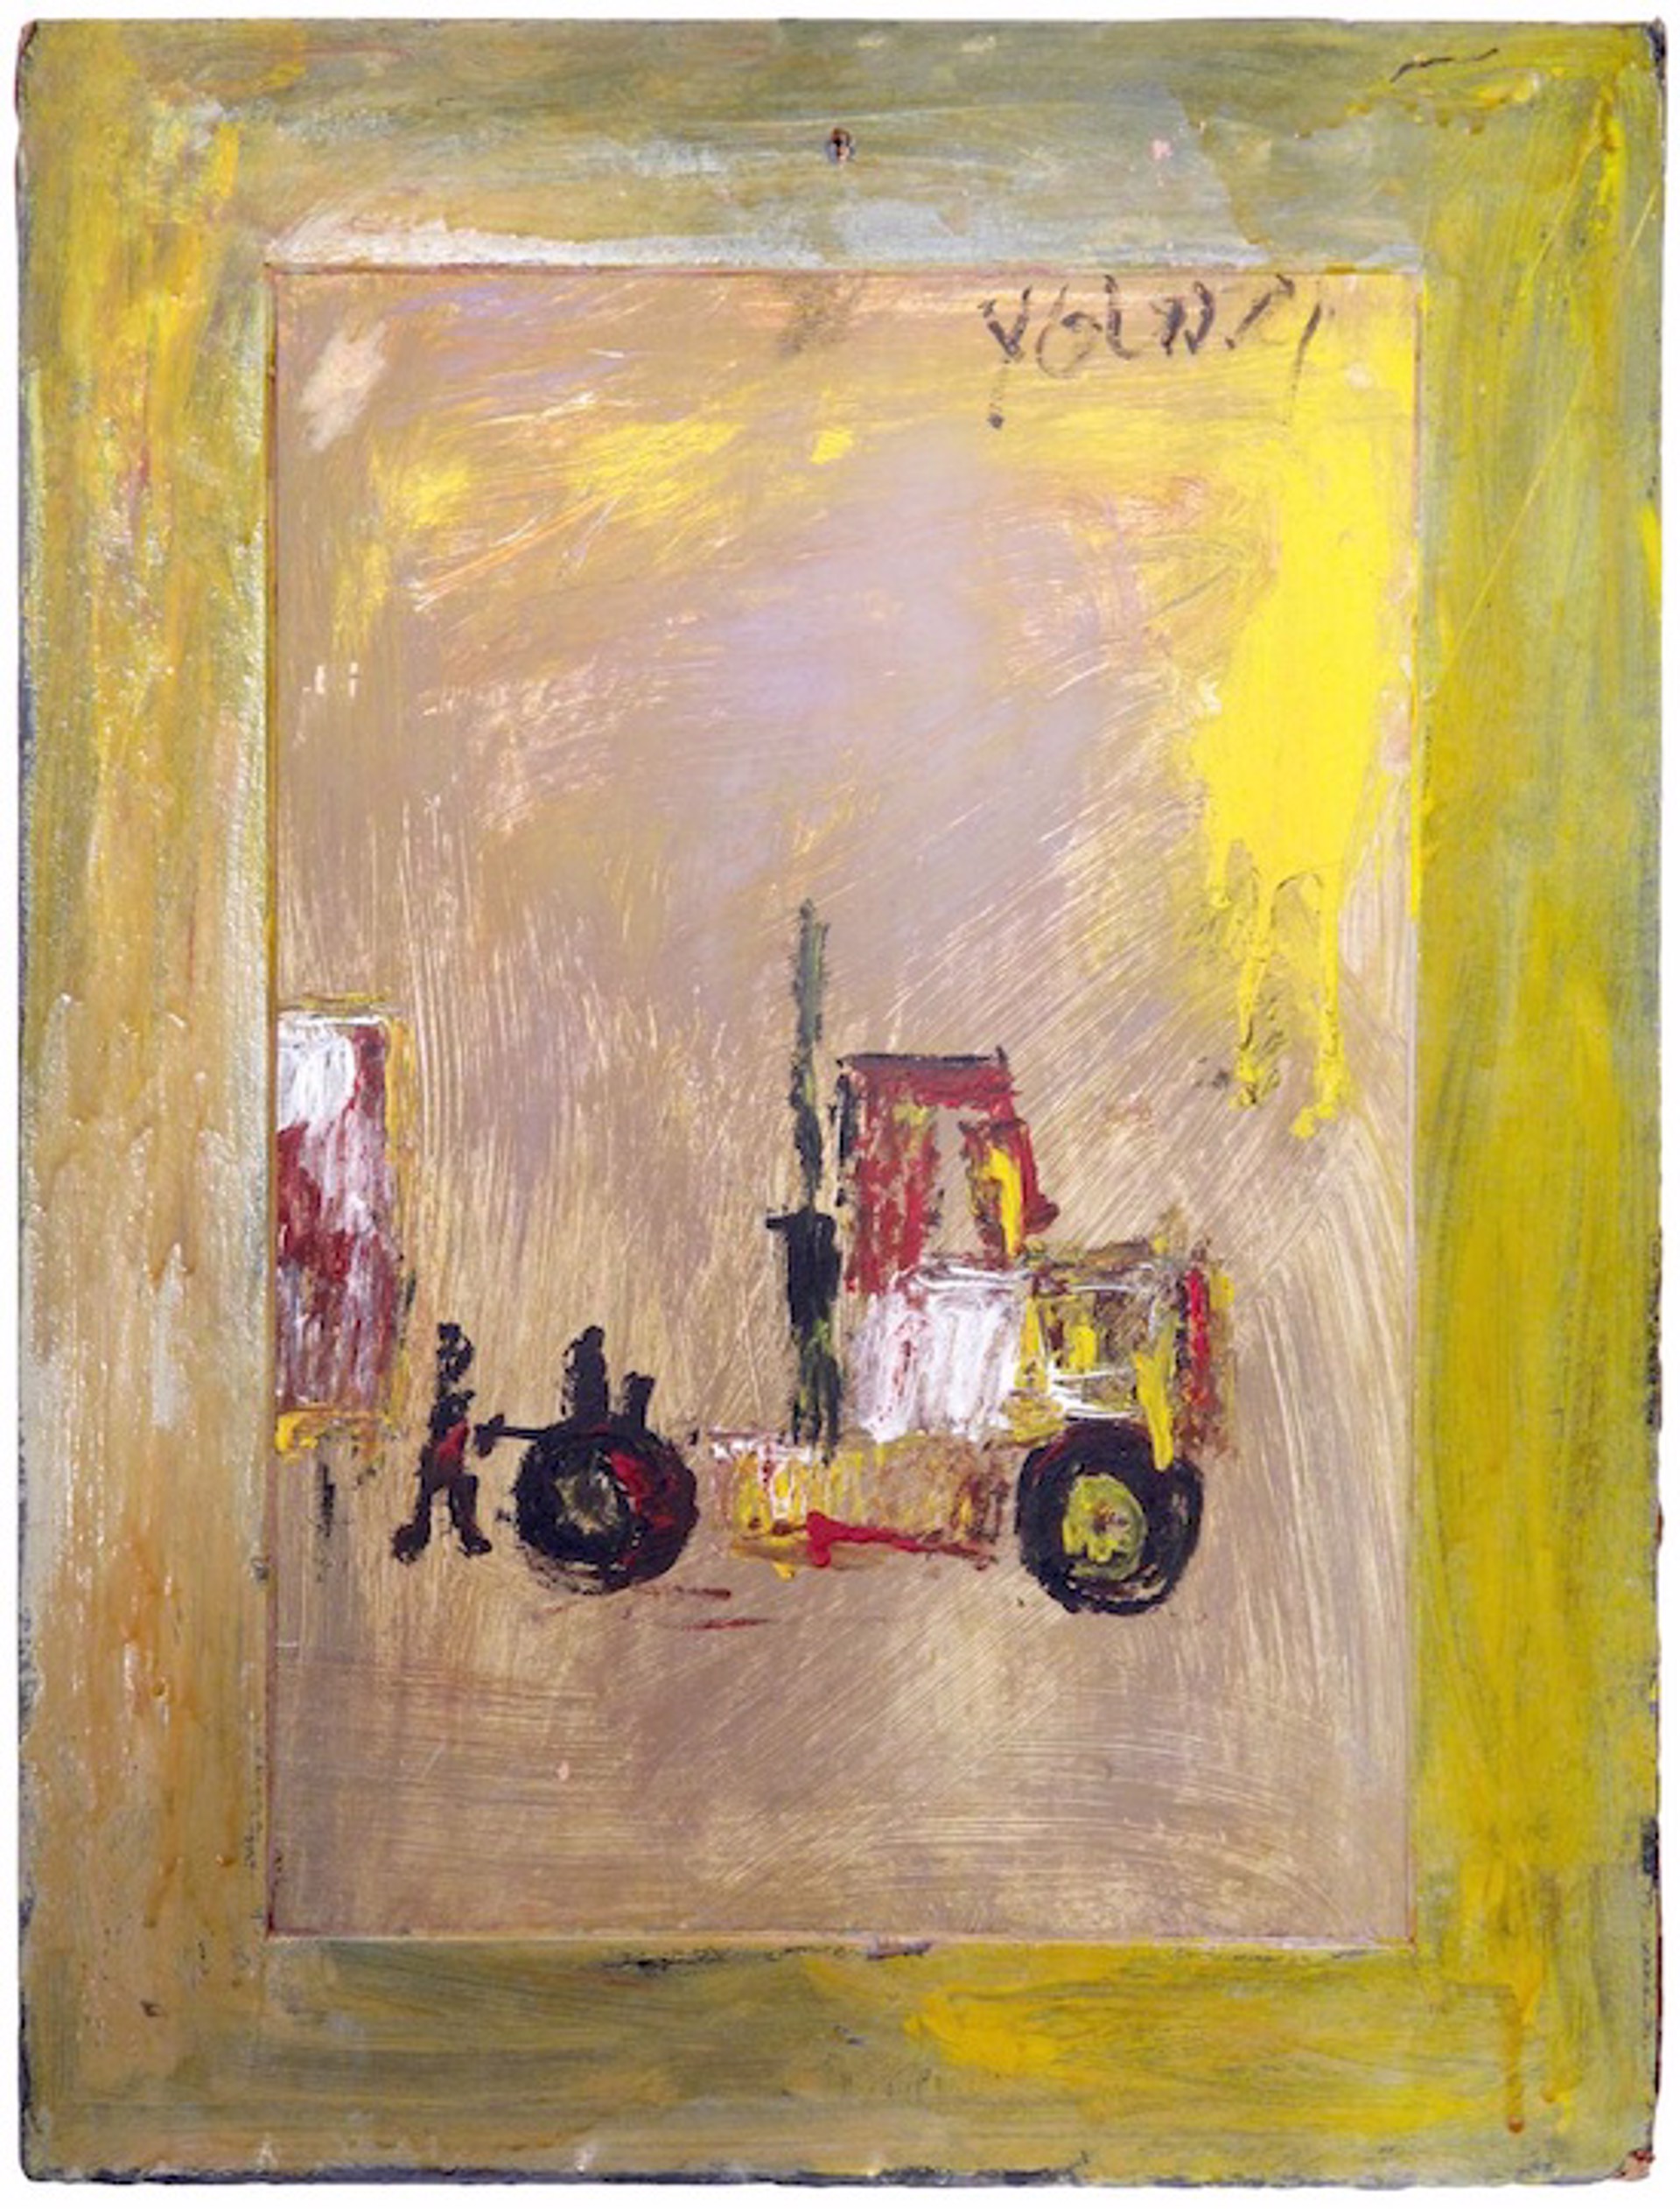 Tractor by Purvis Young